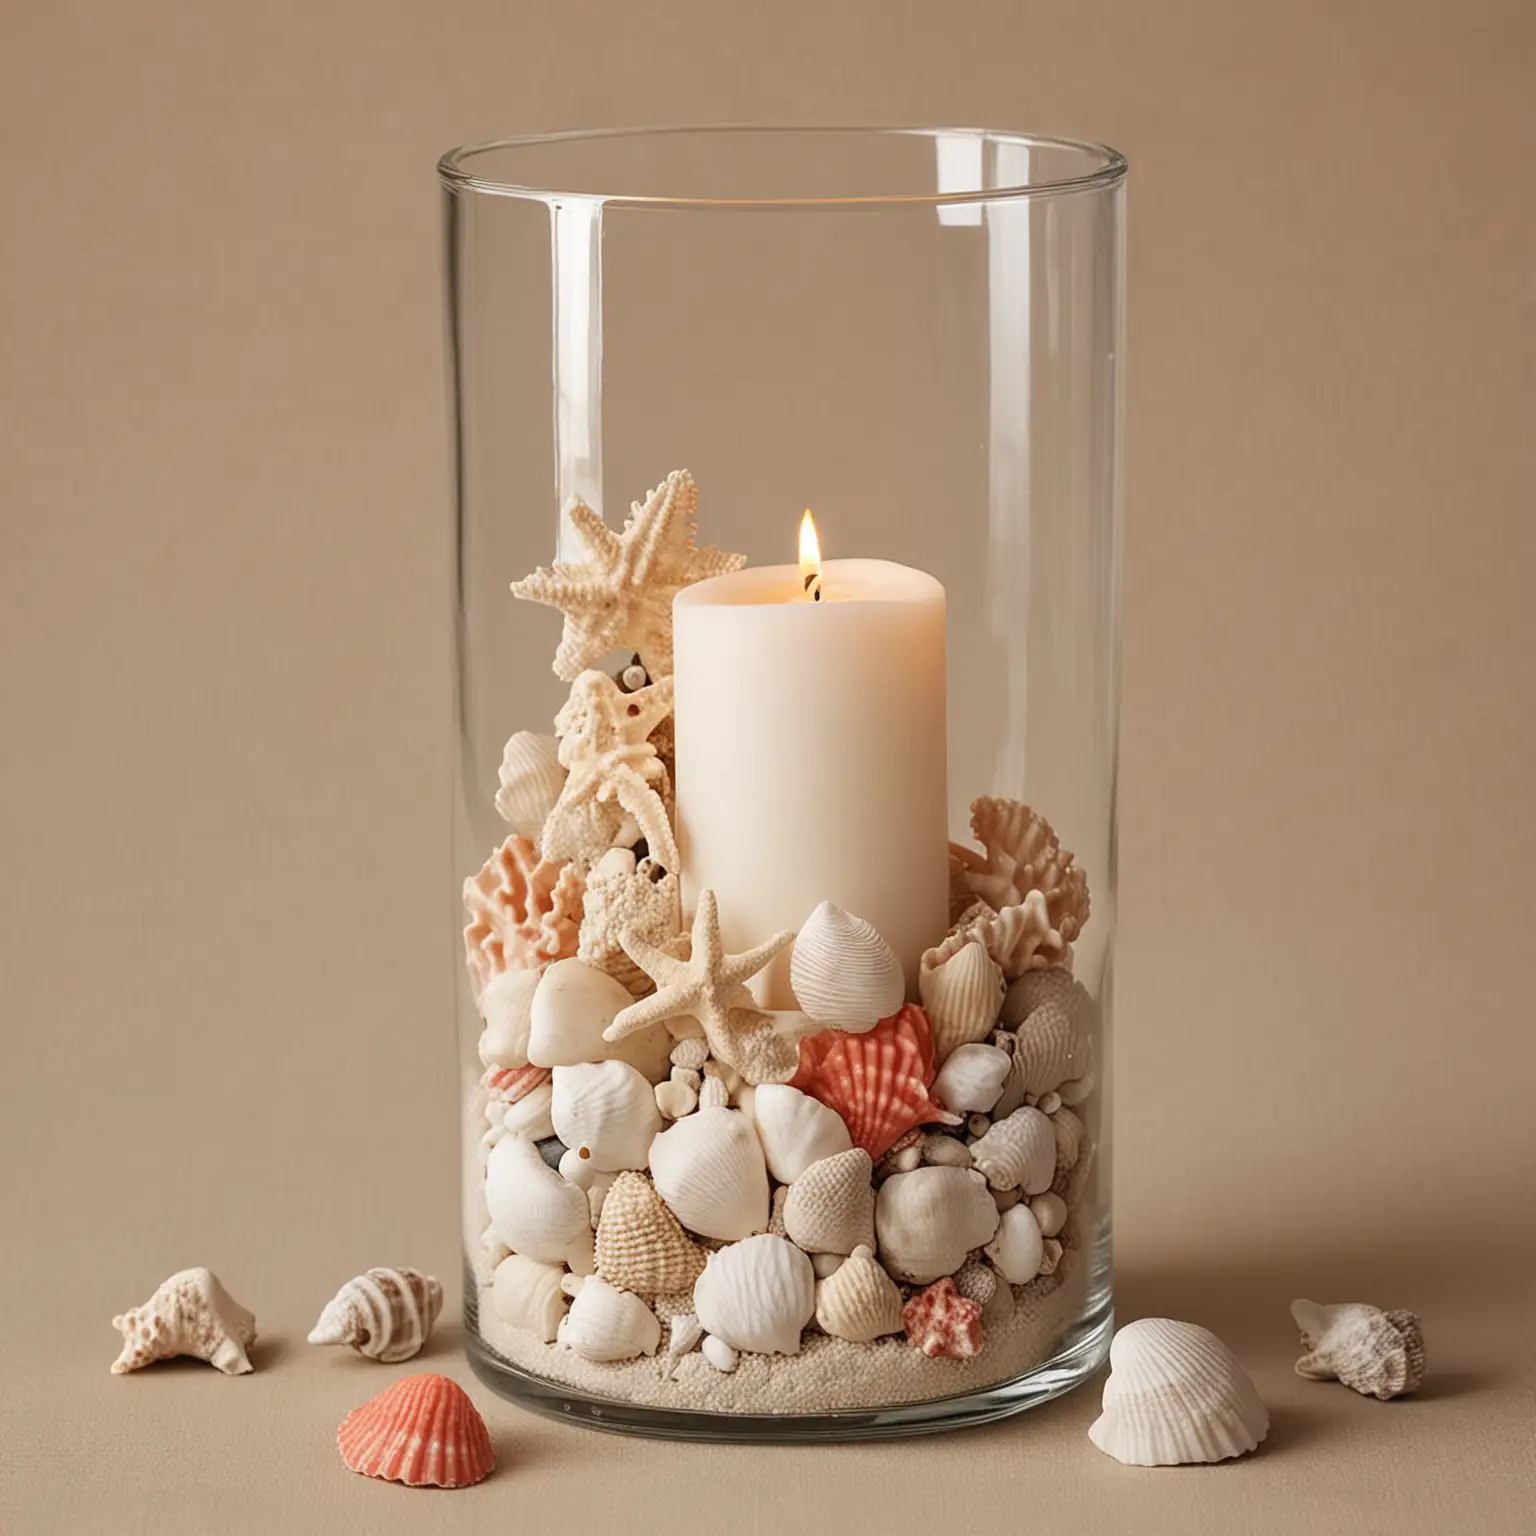 simple DIY wedding centerpiece with a cylinder vase holding sand, seashells and small pieces of coral; keep background neutral